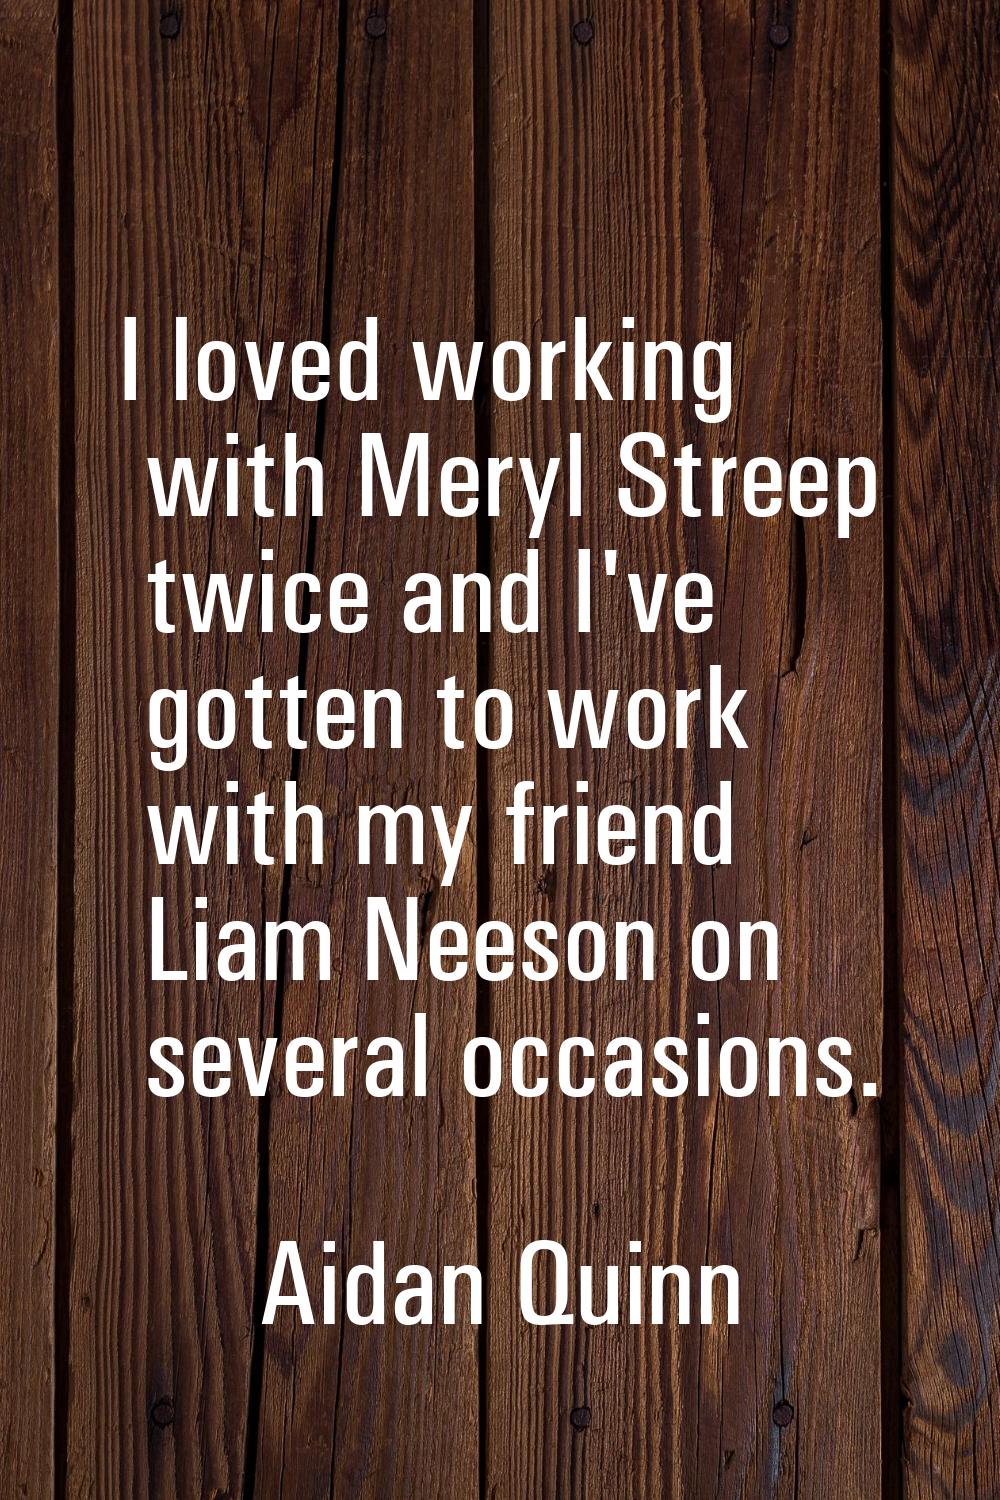 I loved working with Meryl Streep twice and I've gotten to work with my friend Liam Neeson on sever